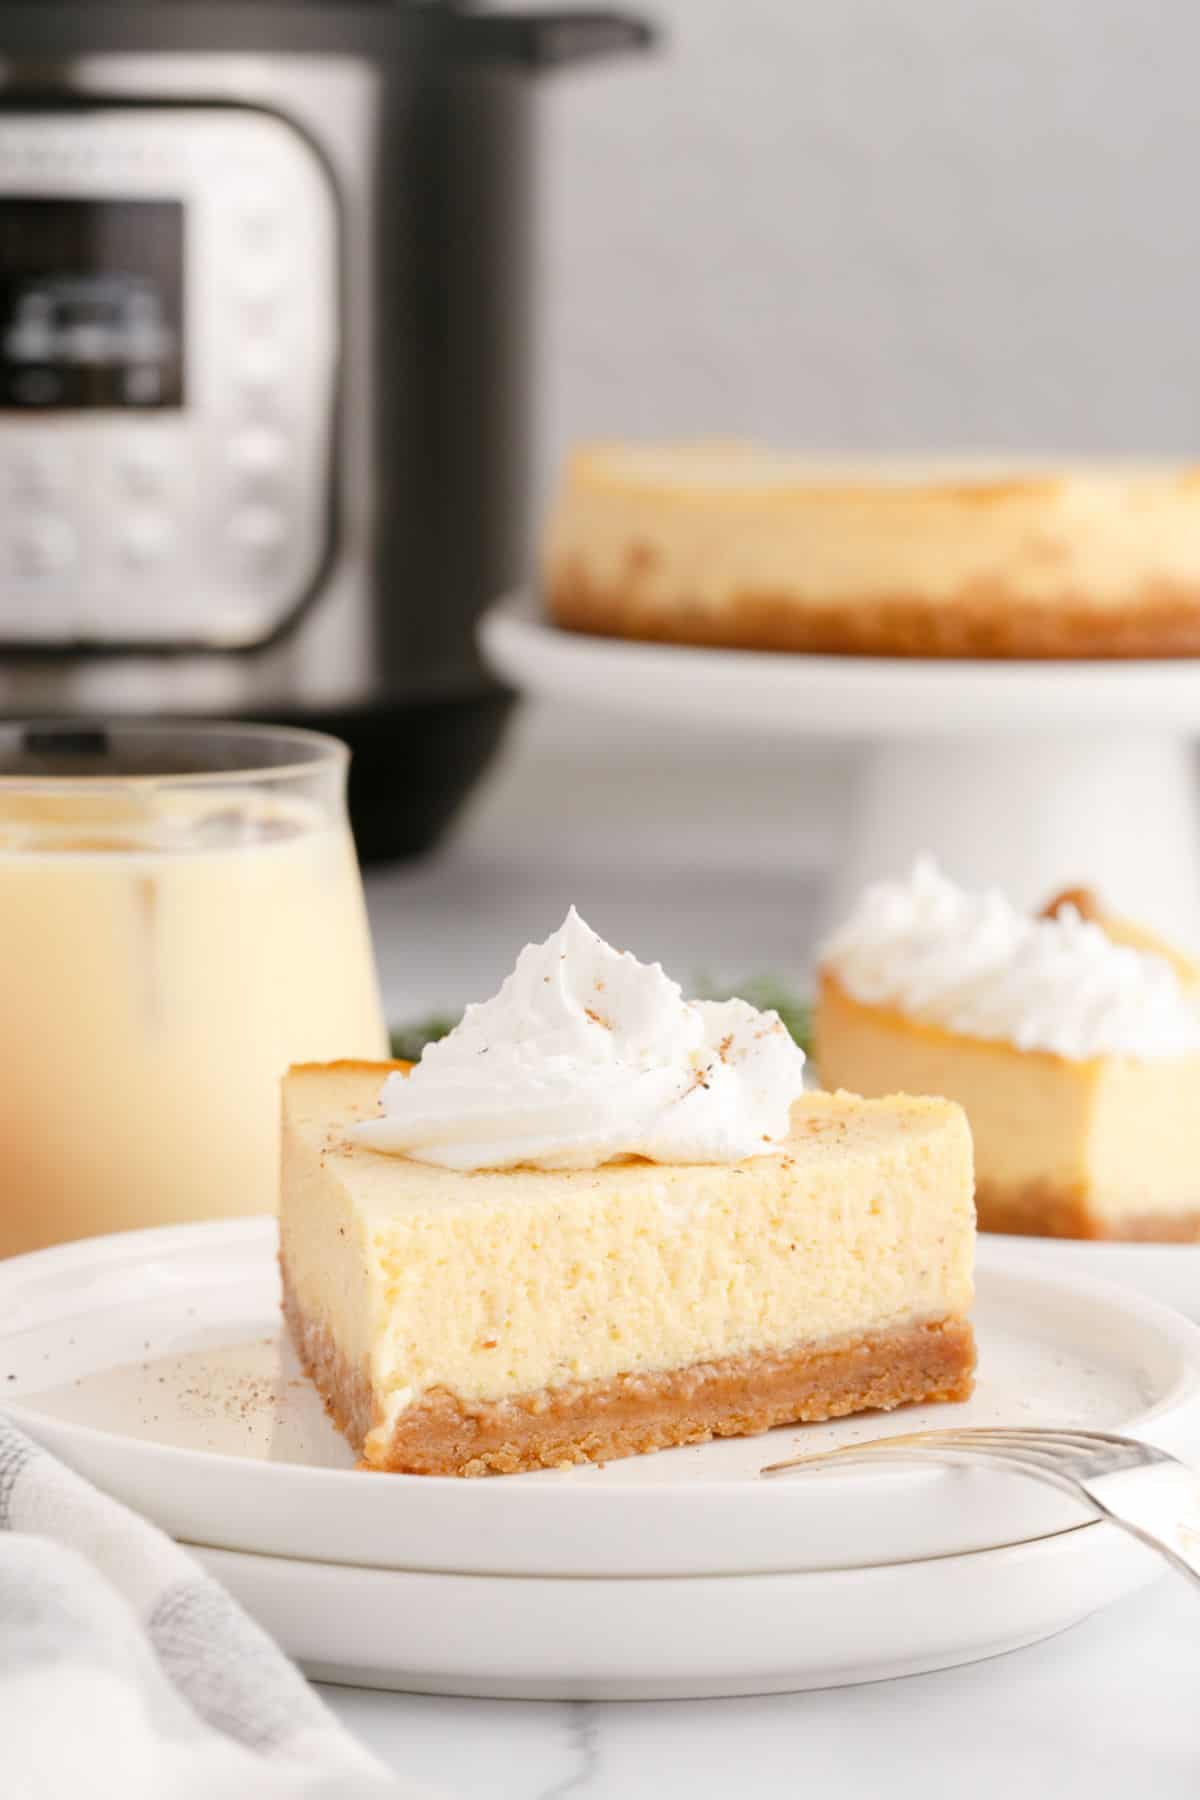 Slices of eggnog cheesecake made in the Instant Pot and served on white plates.